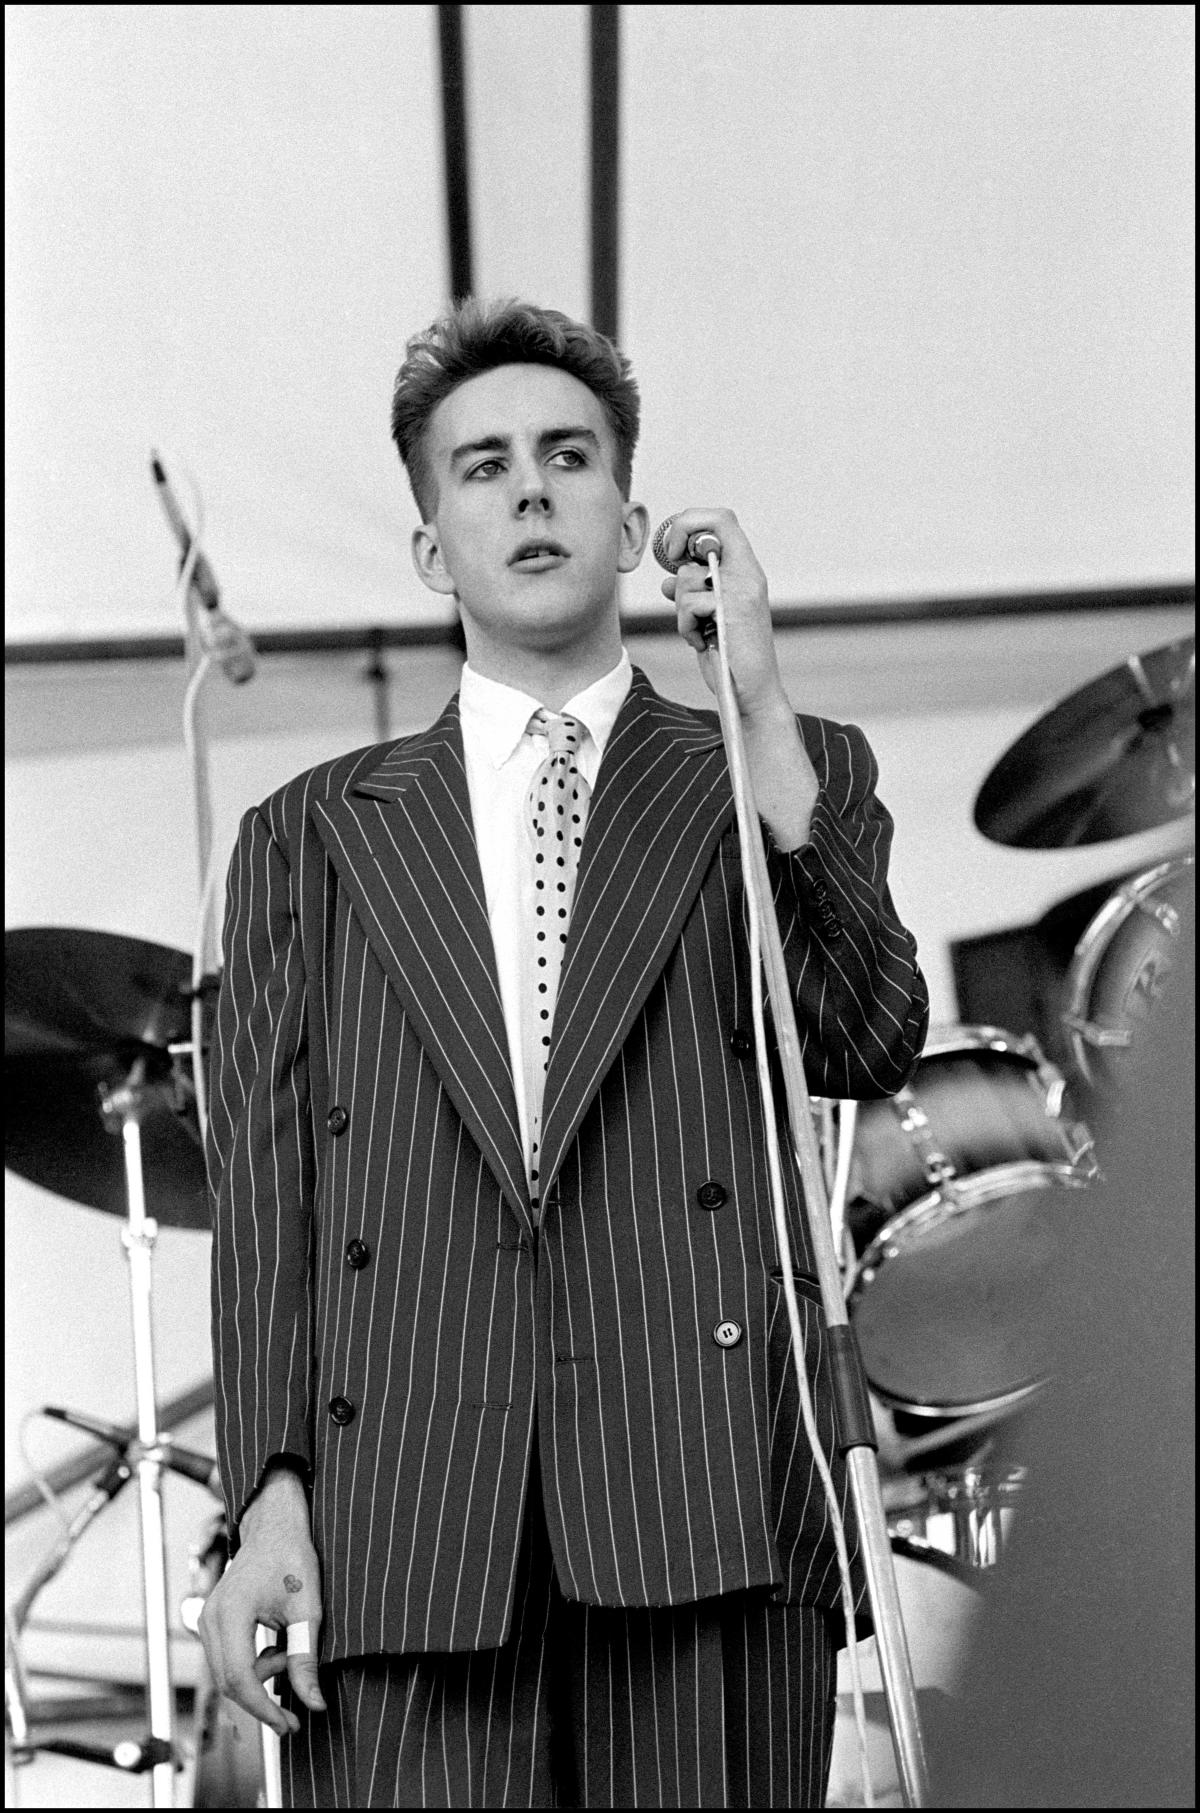 The Specials’ ska and new wave pioneer Terry Hall dead at 63